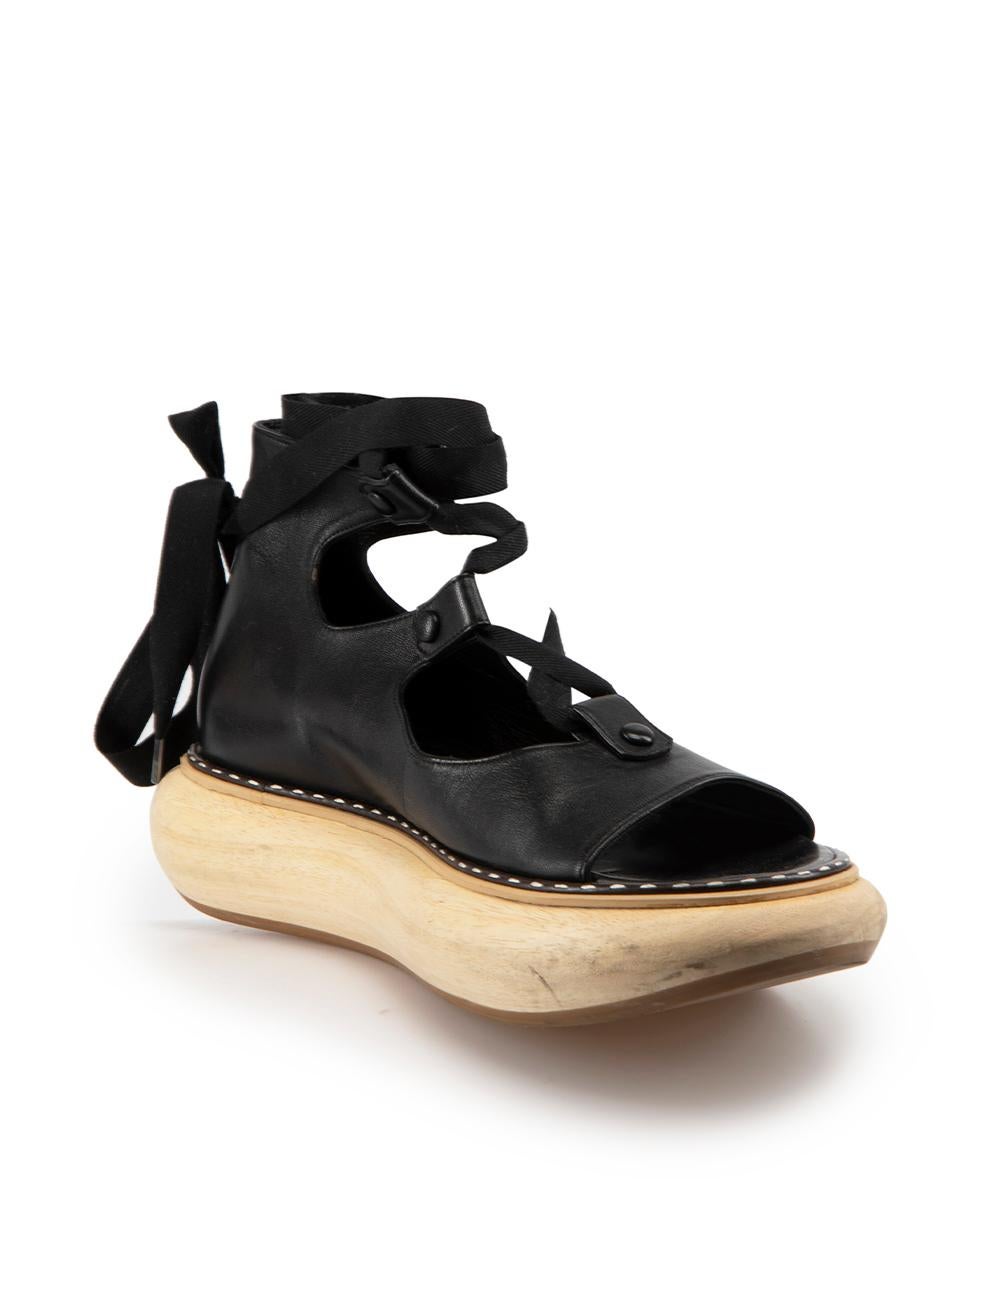 CONDITION is Good. Minor wear to sandals is evident. Light wear to wooden platform with a number of dark scuff marks seen on this used Loewe designer resale item.
  
Details
2018
Black
Leather
Sandals
Wooden platform sole
Lace up fastening
Open toe
